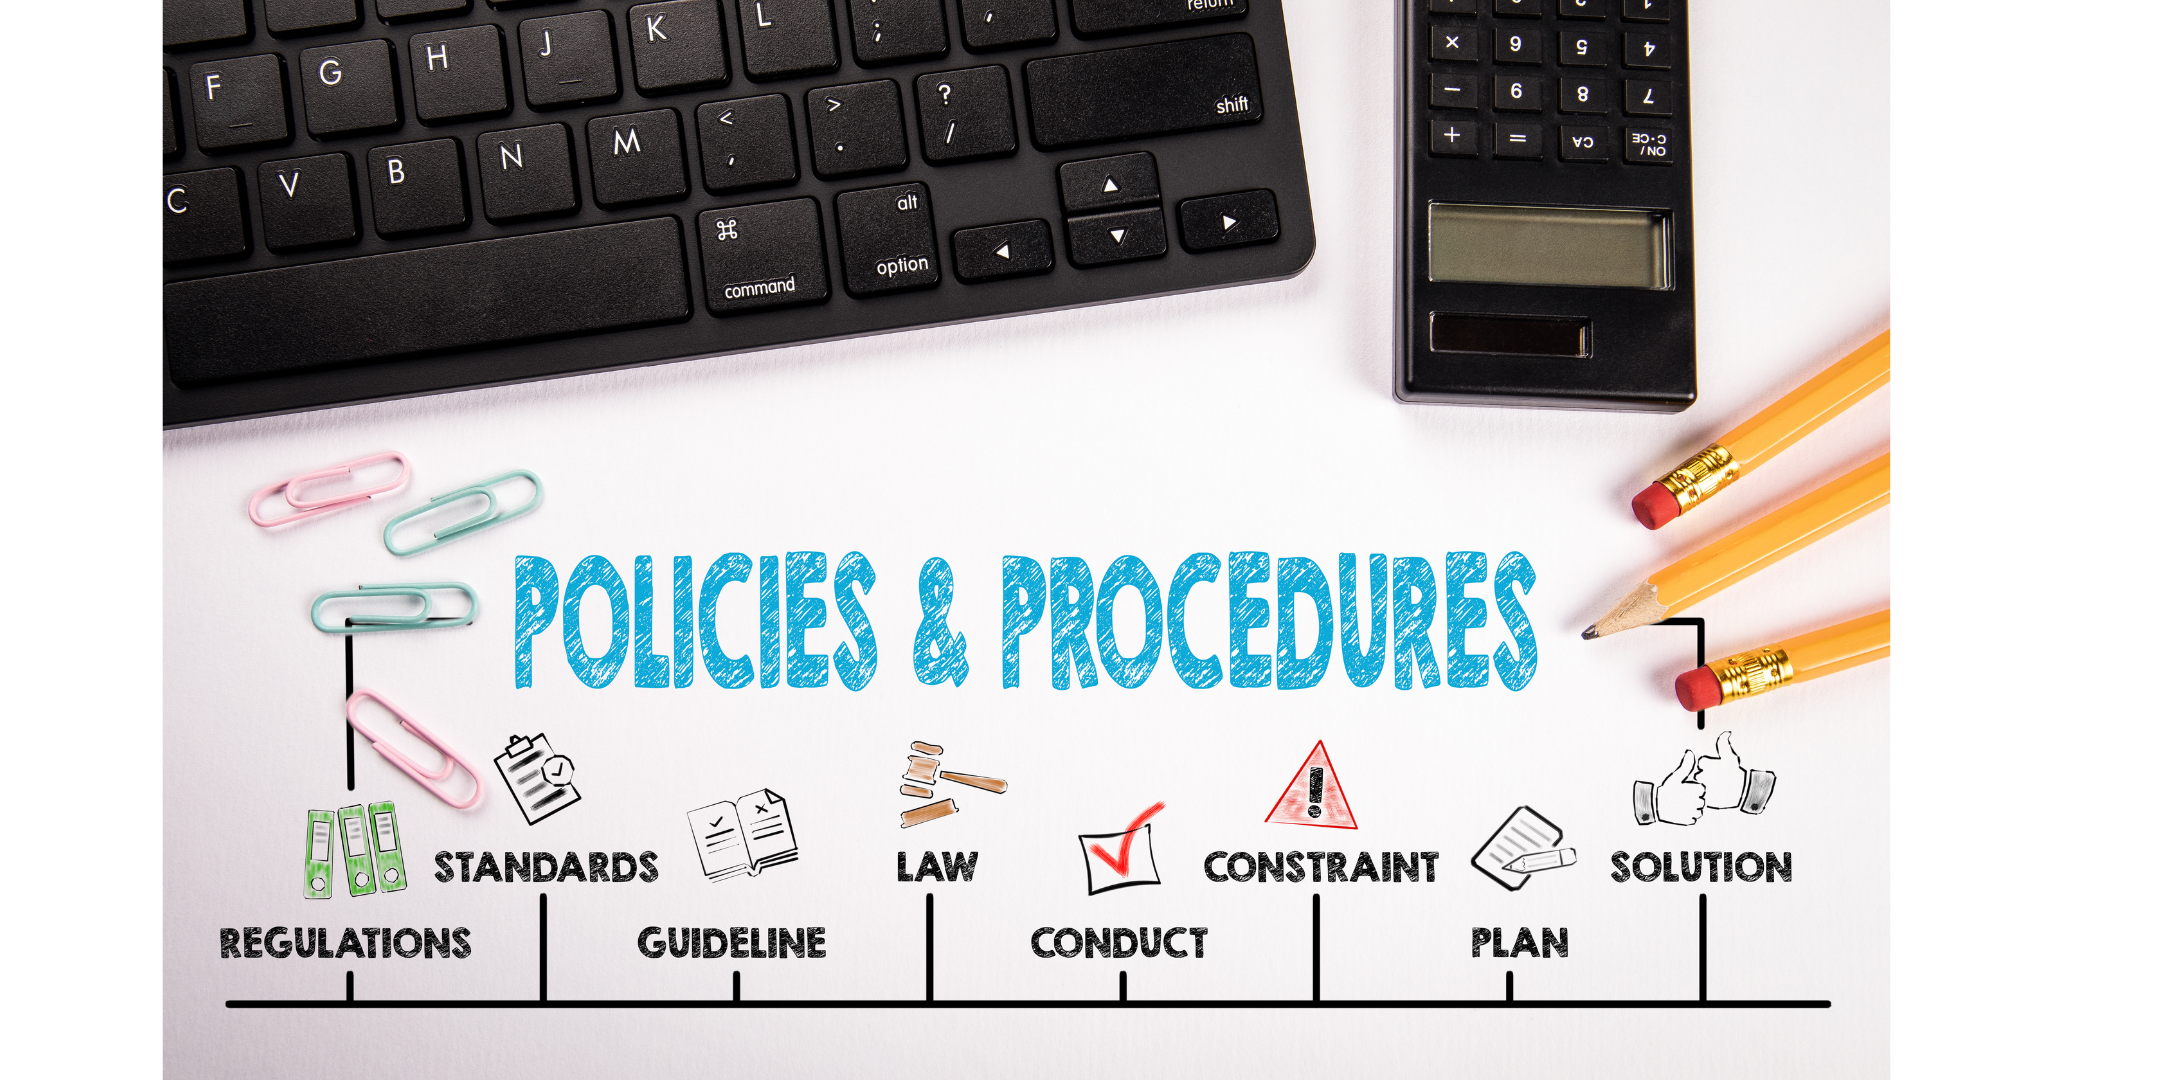 a keyboard and calculator on a white desk. There is writing on the desk. Policies and procedures. regulations. standards. guideline. law. conduct. constraint. plan. solution